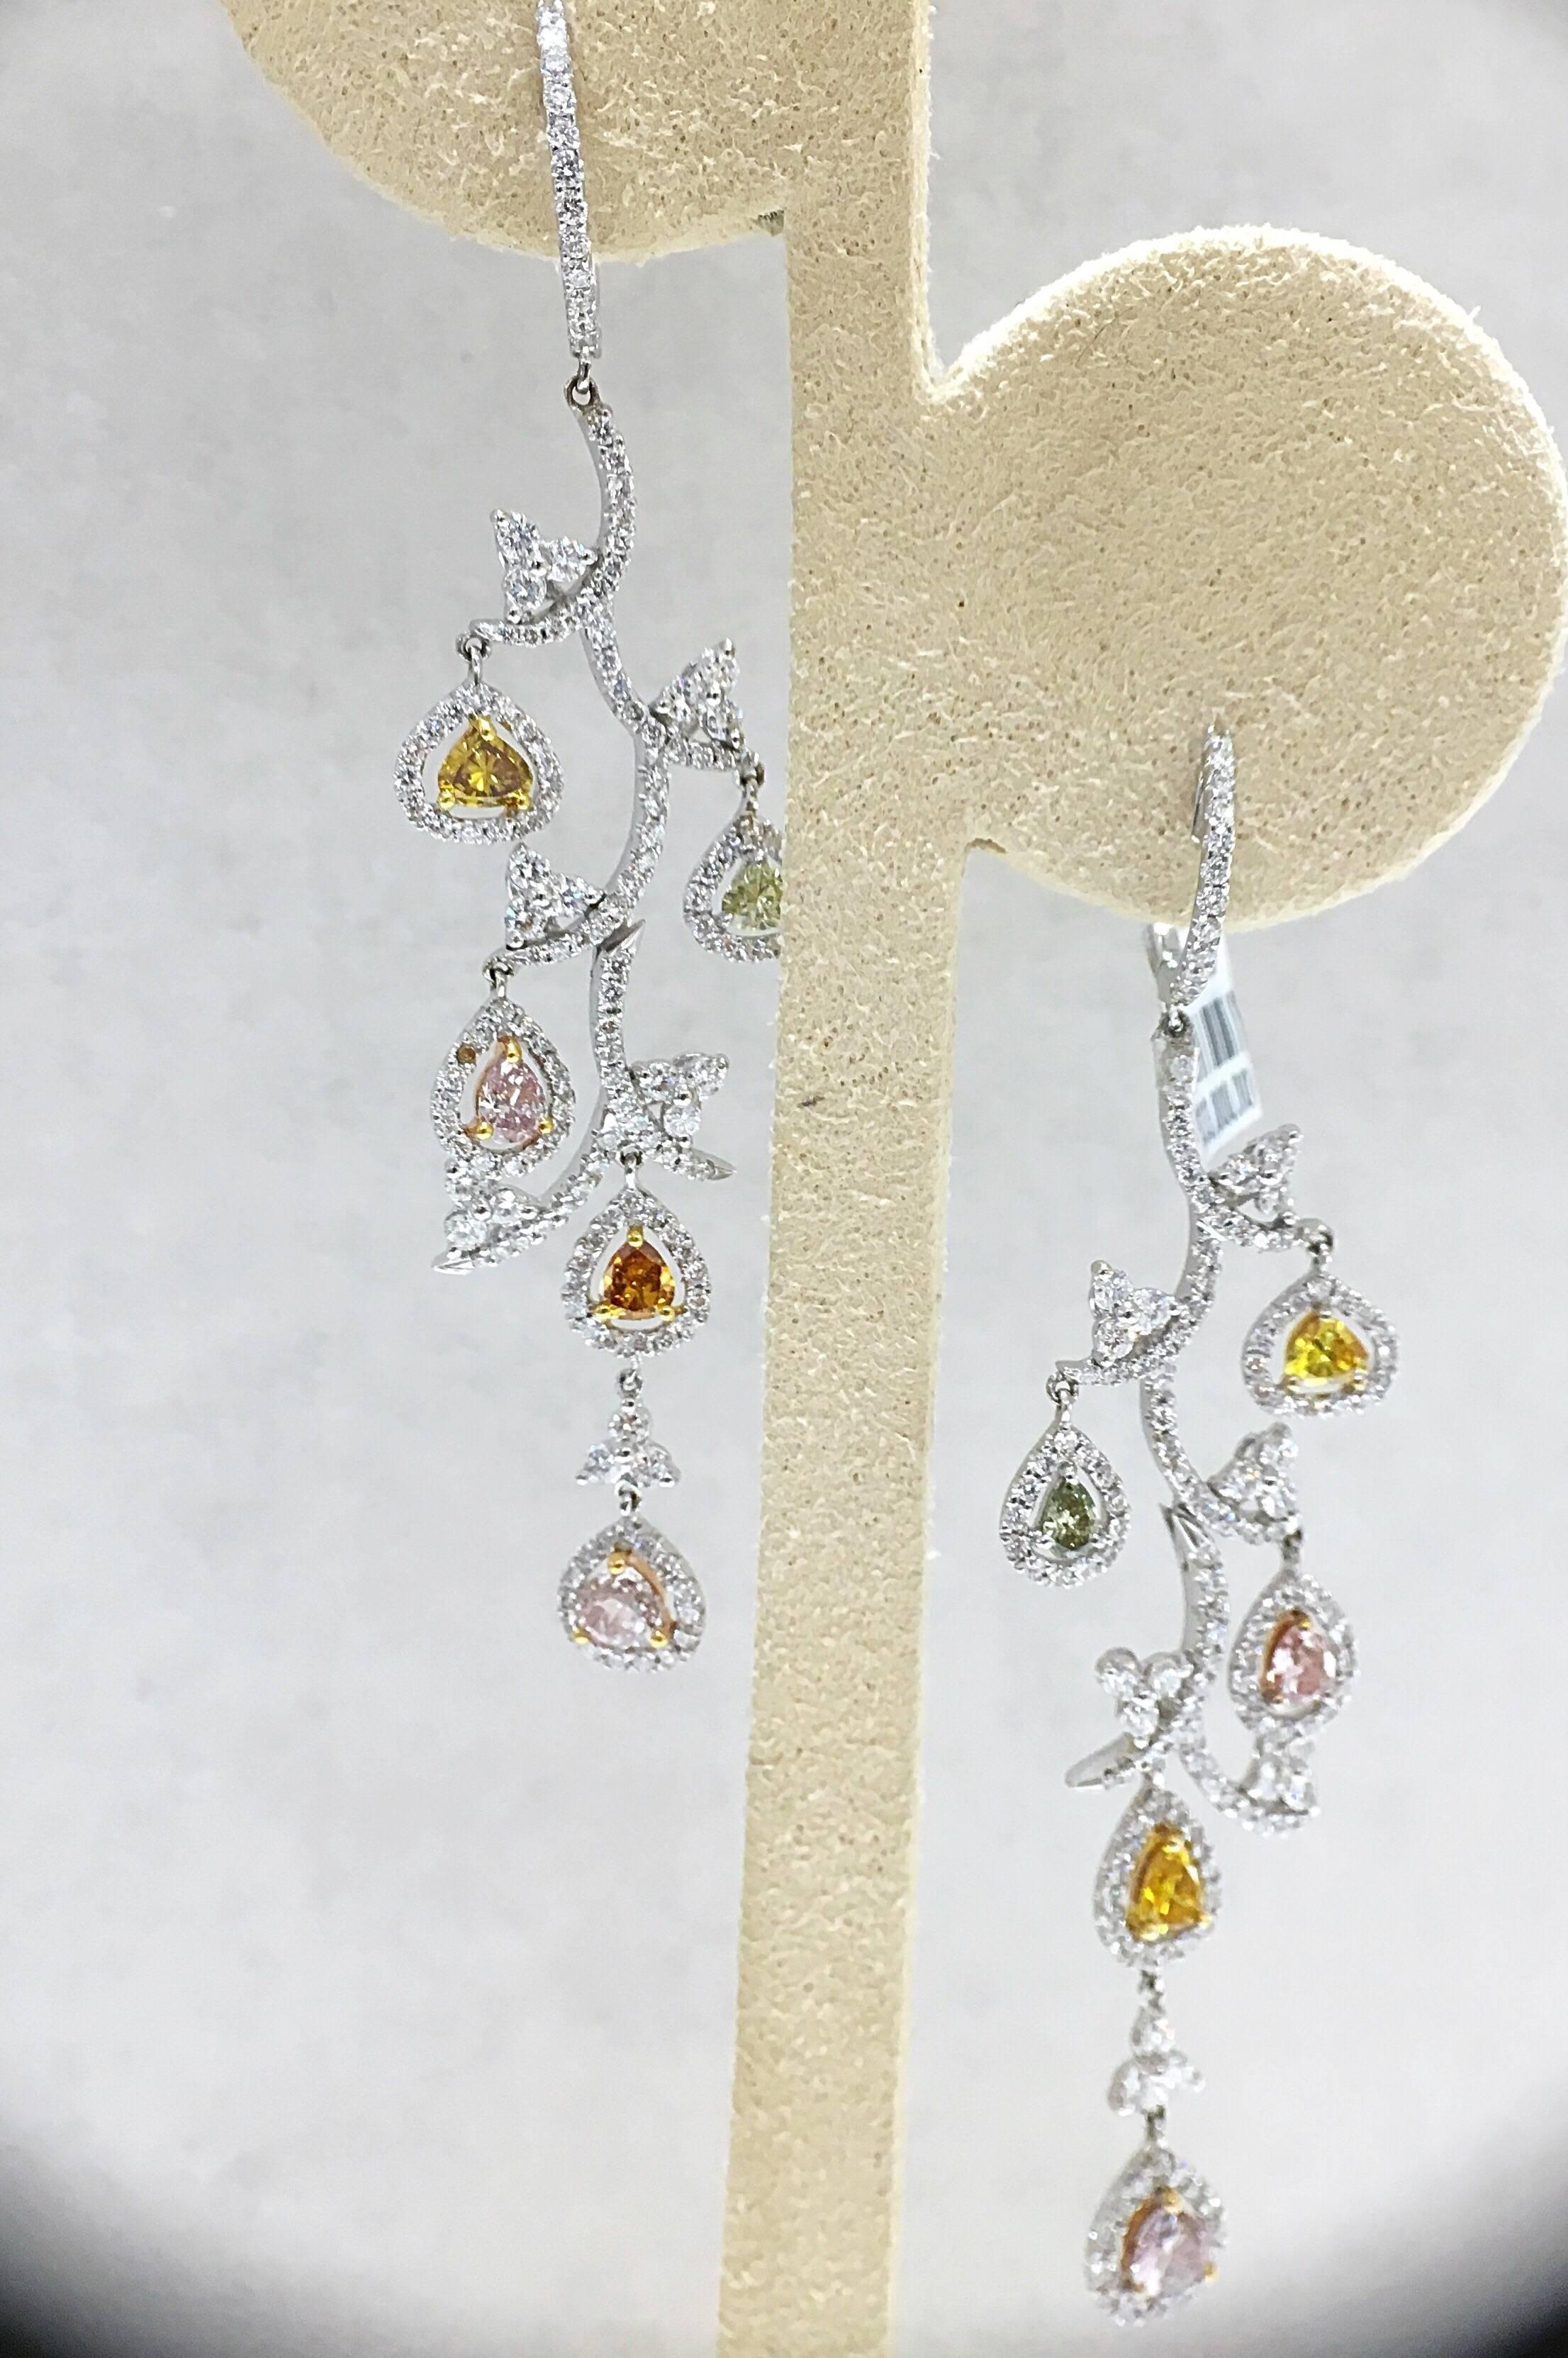 Cellini Jewelers Leaf motif earrings are set in 18 karat white gold with pave white diamonds and accented with natural fancy colored diamonds, including pink and yellow diamonds.  Approximately 2.75